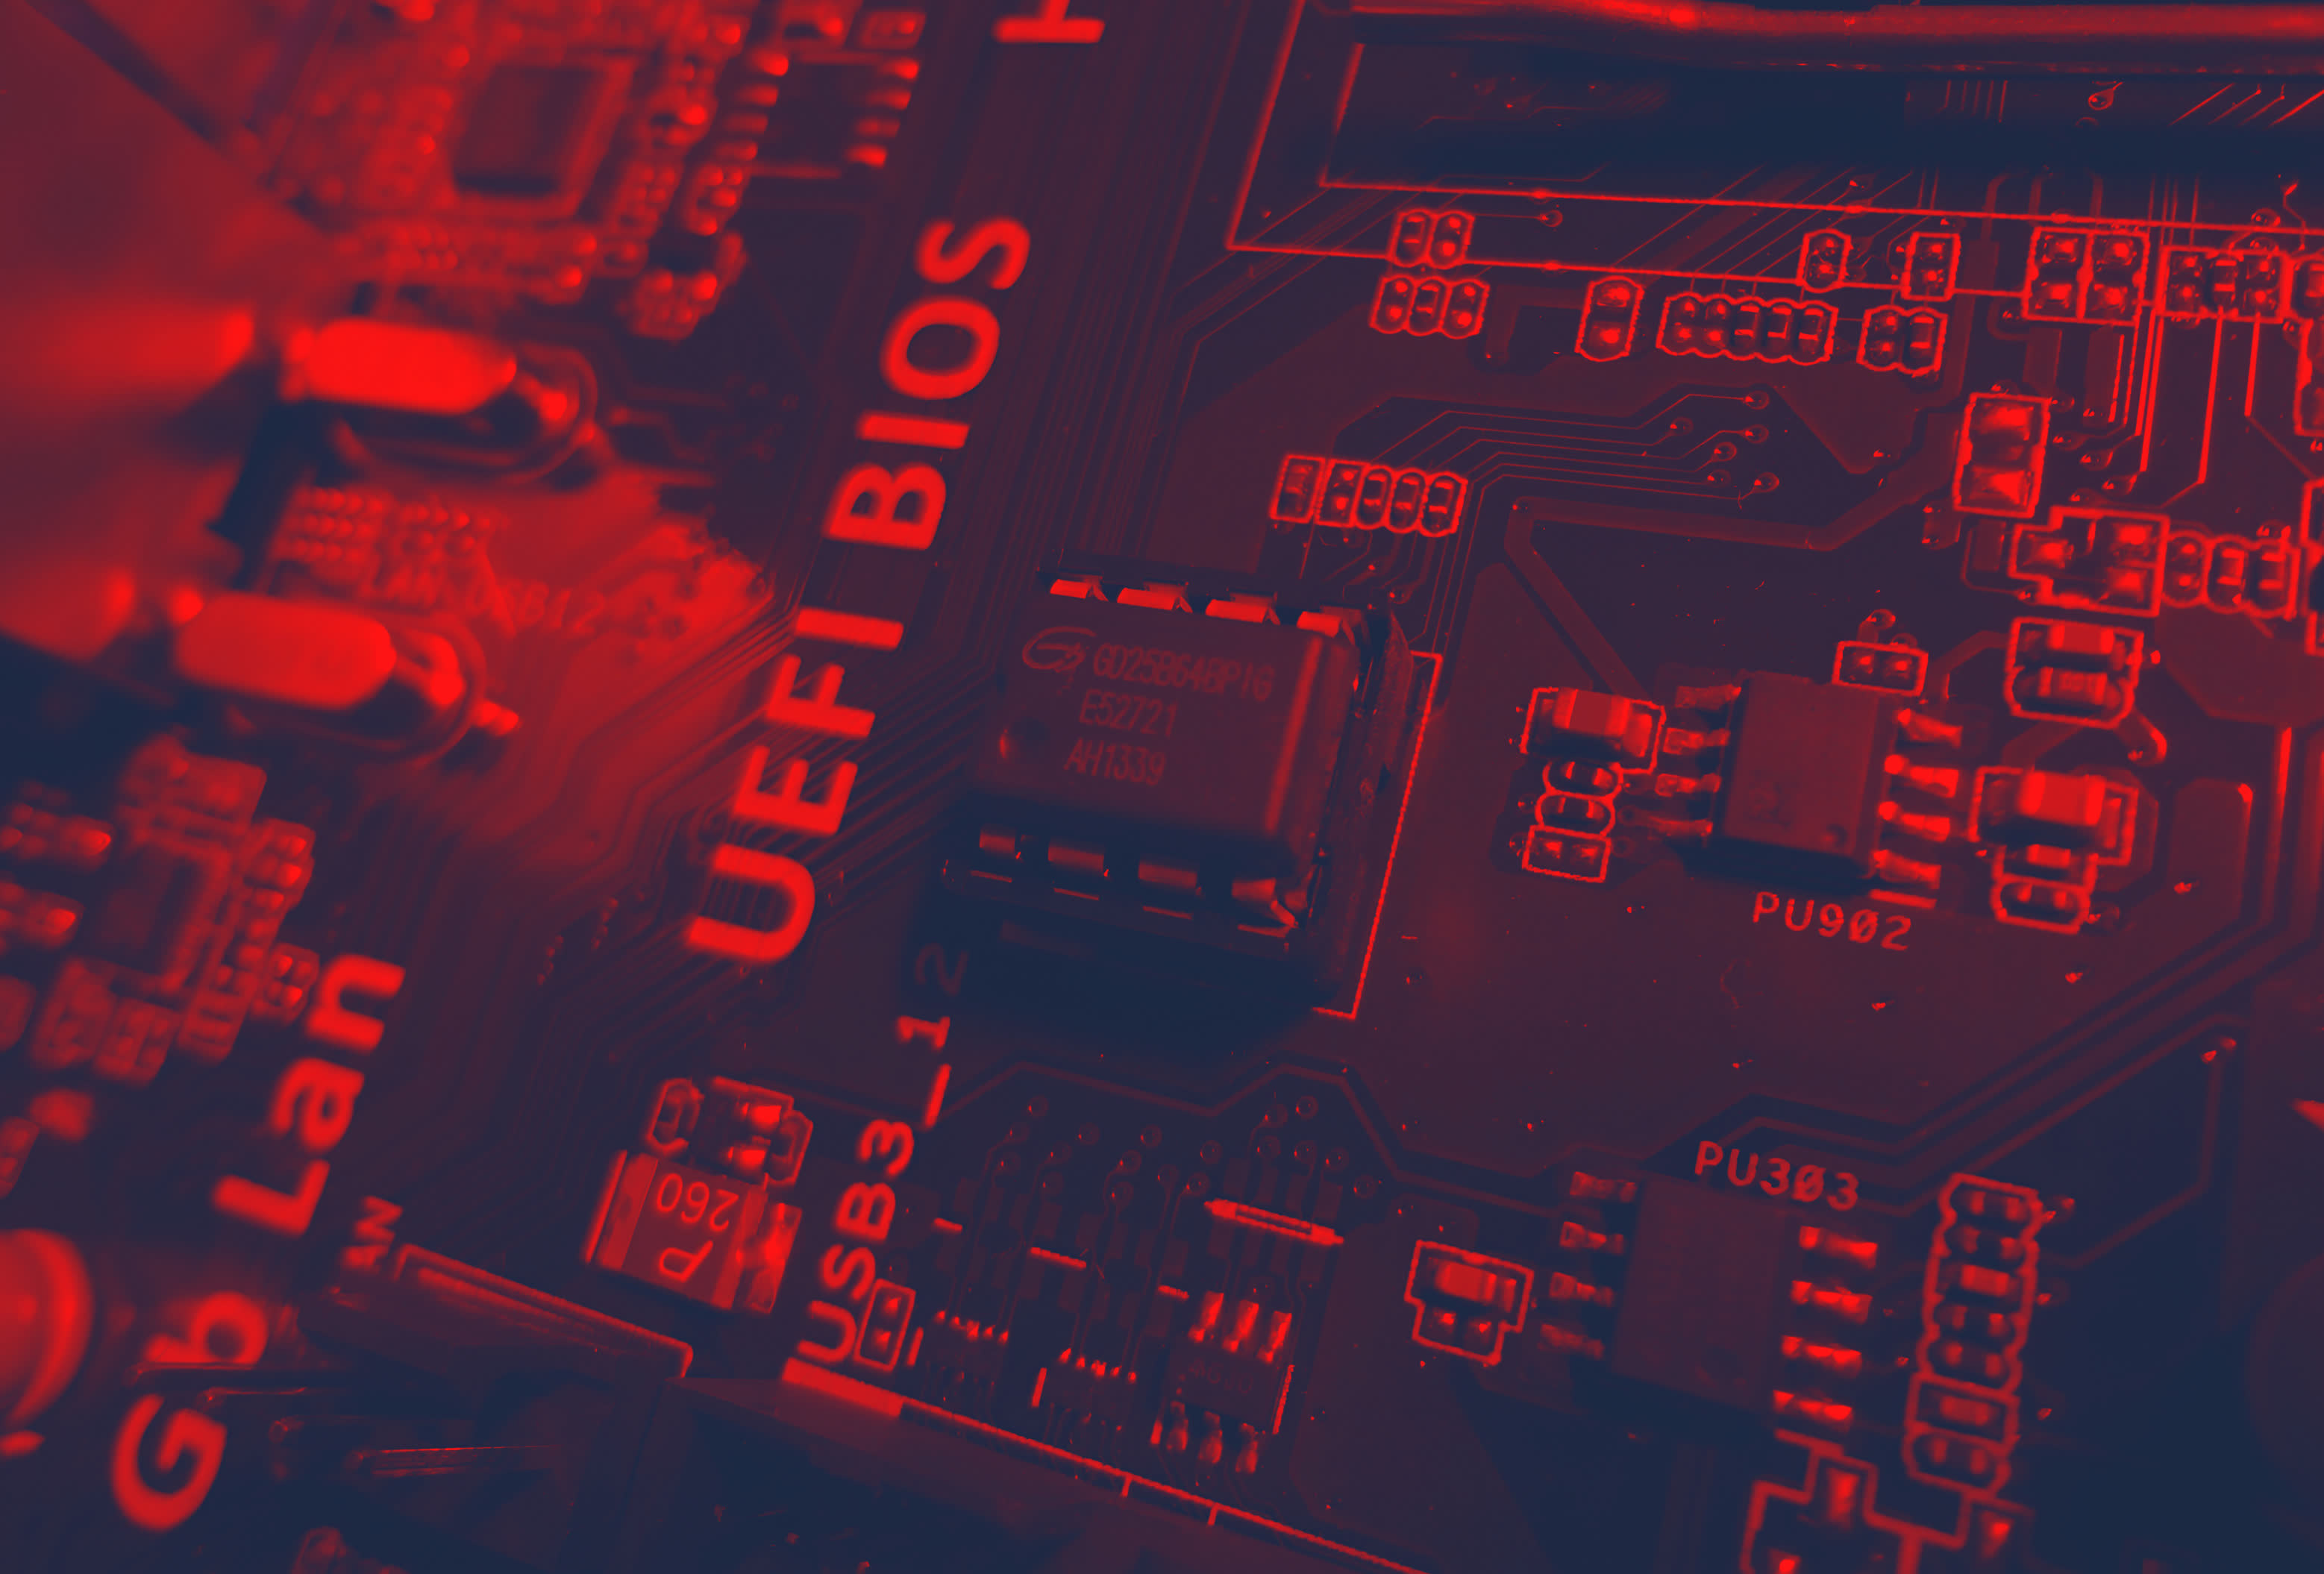 For years, some Gigabyte and Asus motherboards carried UEFI malware